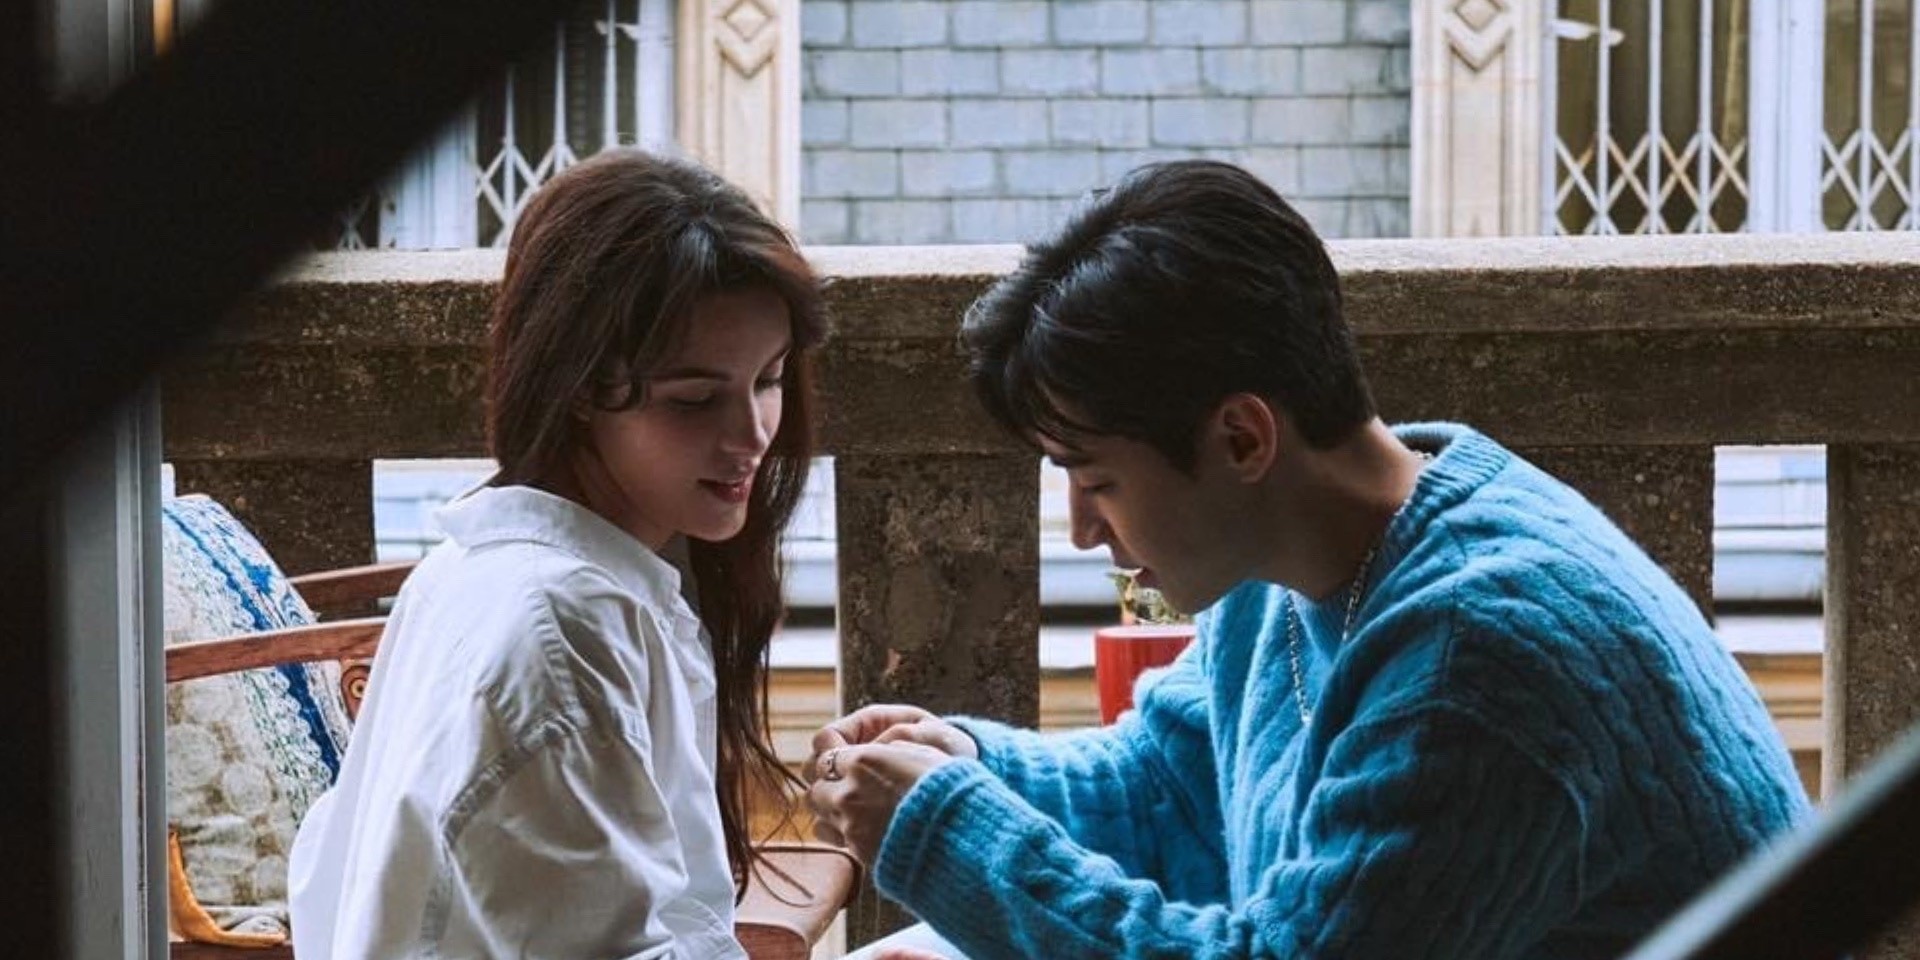 Henry Lau and Yuna contemplate if 'Real Love Still Exists' in new